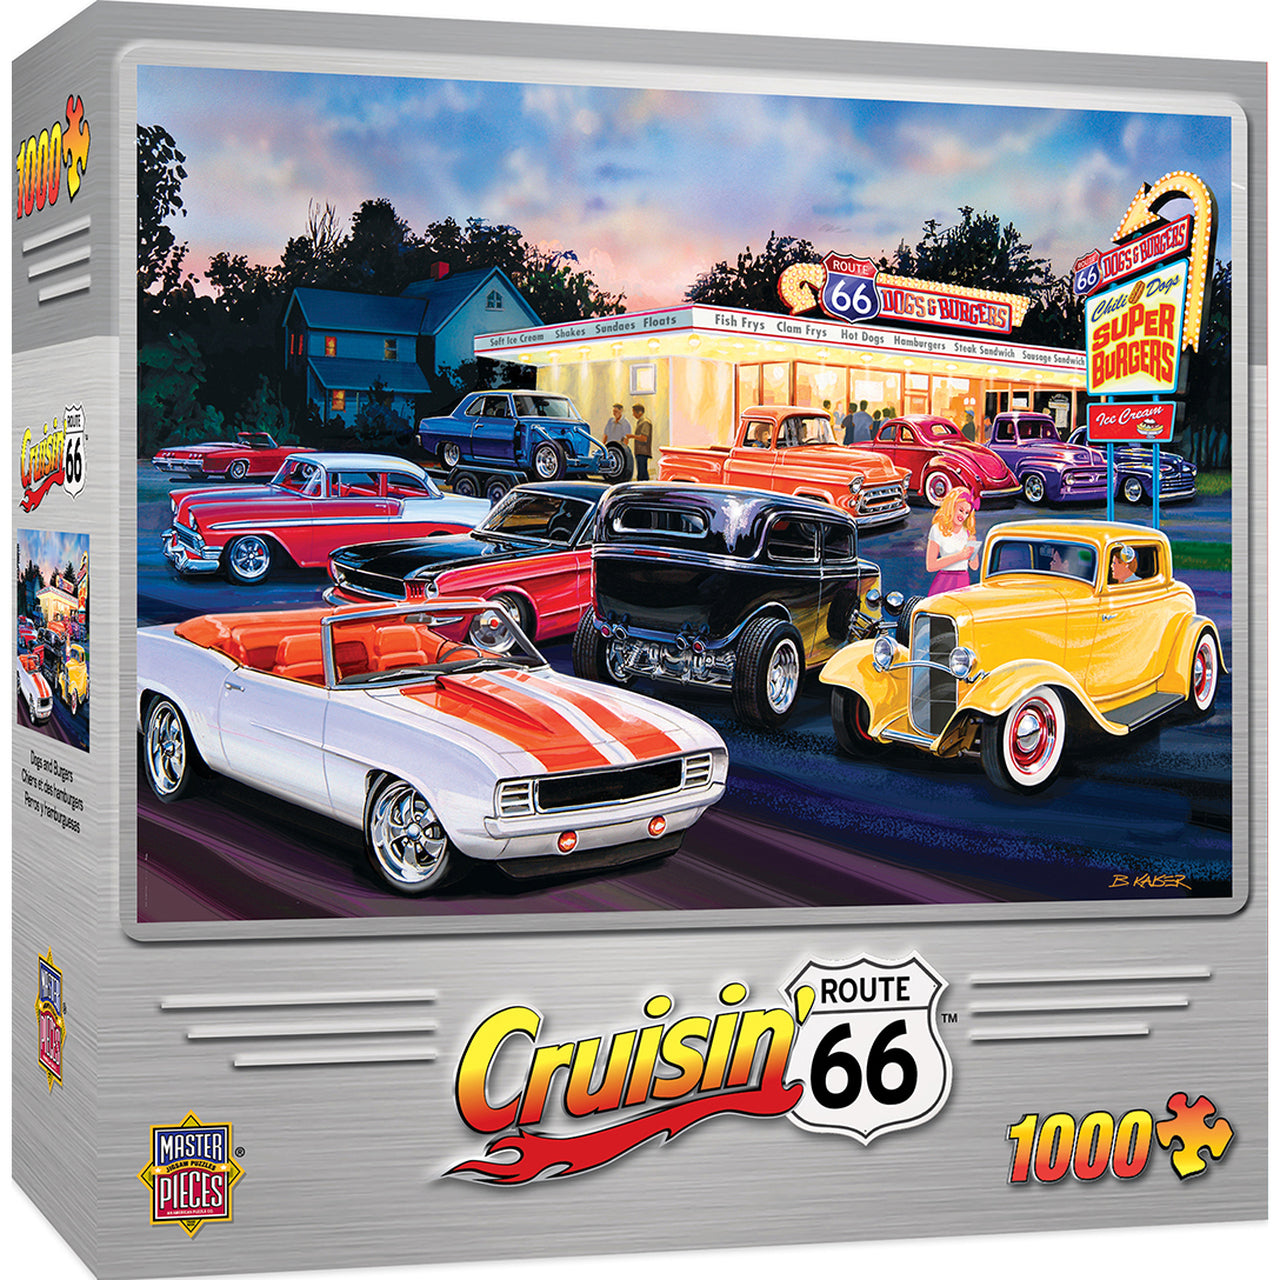 Cruisin' Route 66 Dogs & Burgers - 1000 Piece Puzzle by Bruce Kaiser